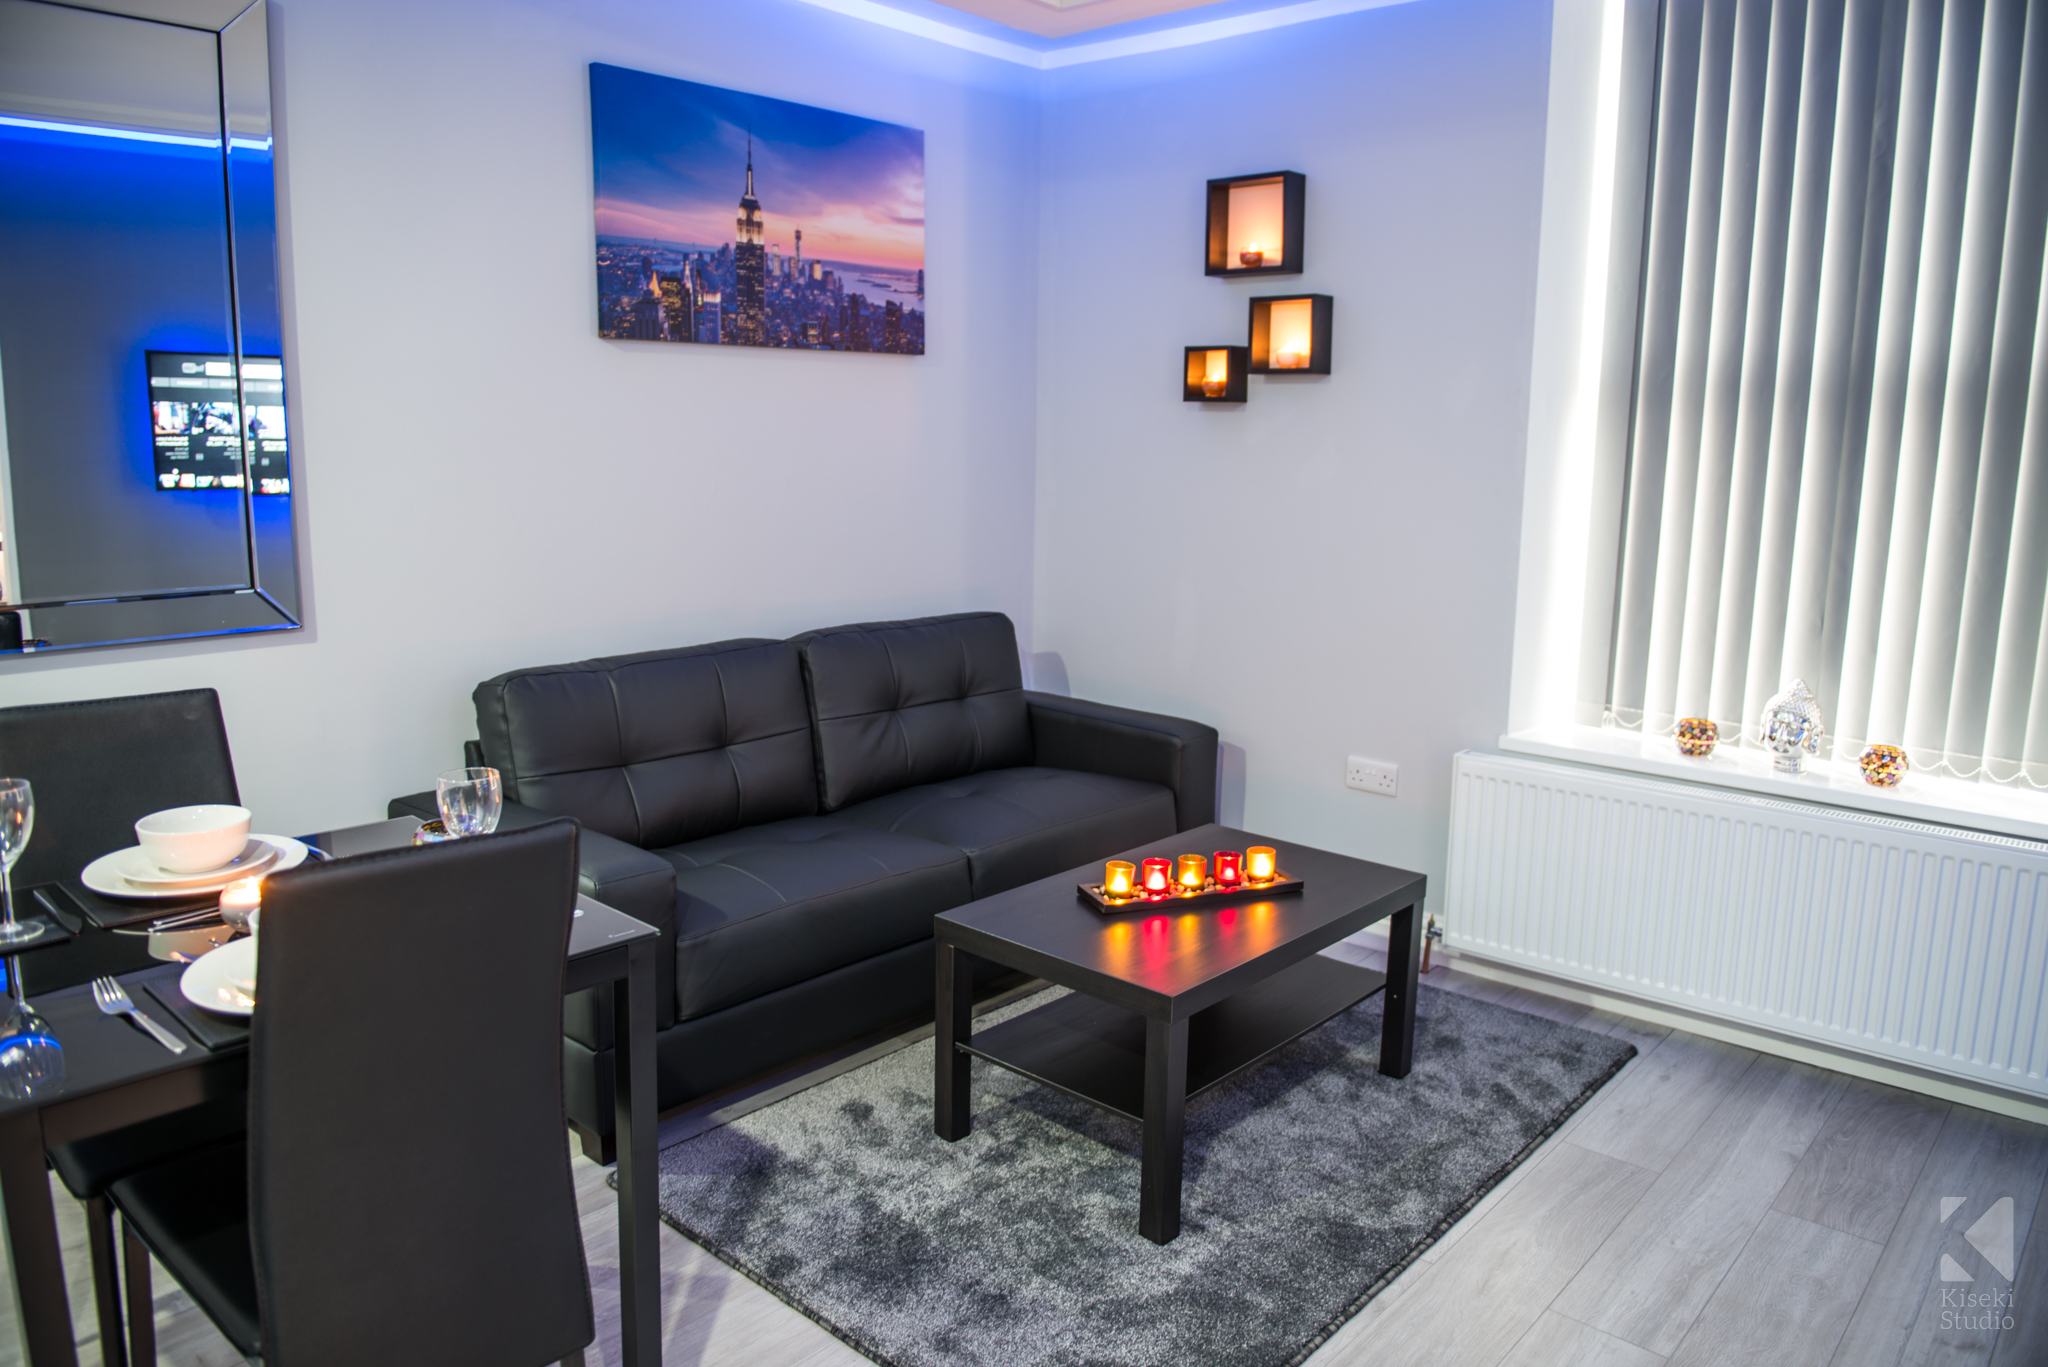 meridian-apartments-bradford-commerical-professional-photography-building-rental-serviced-couch